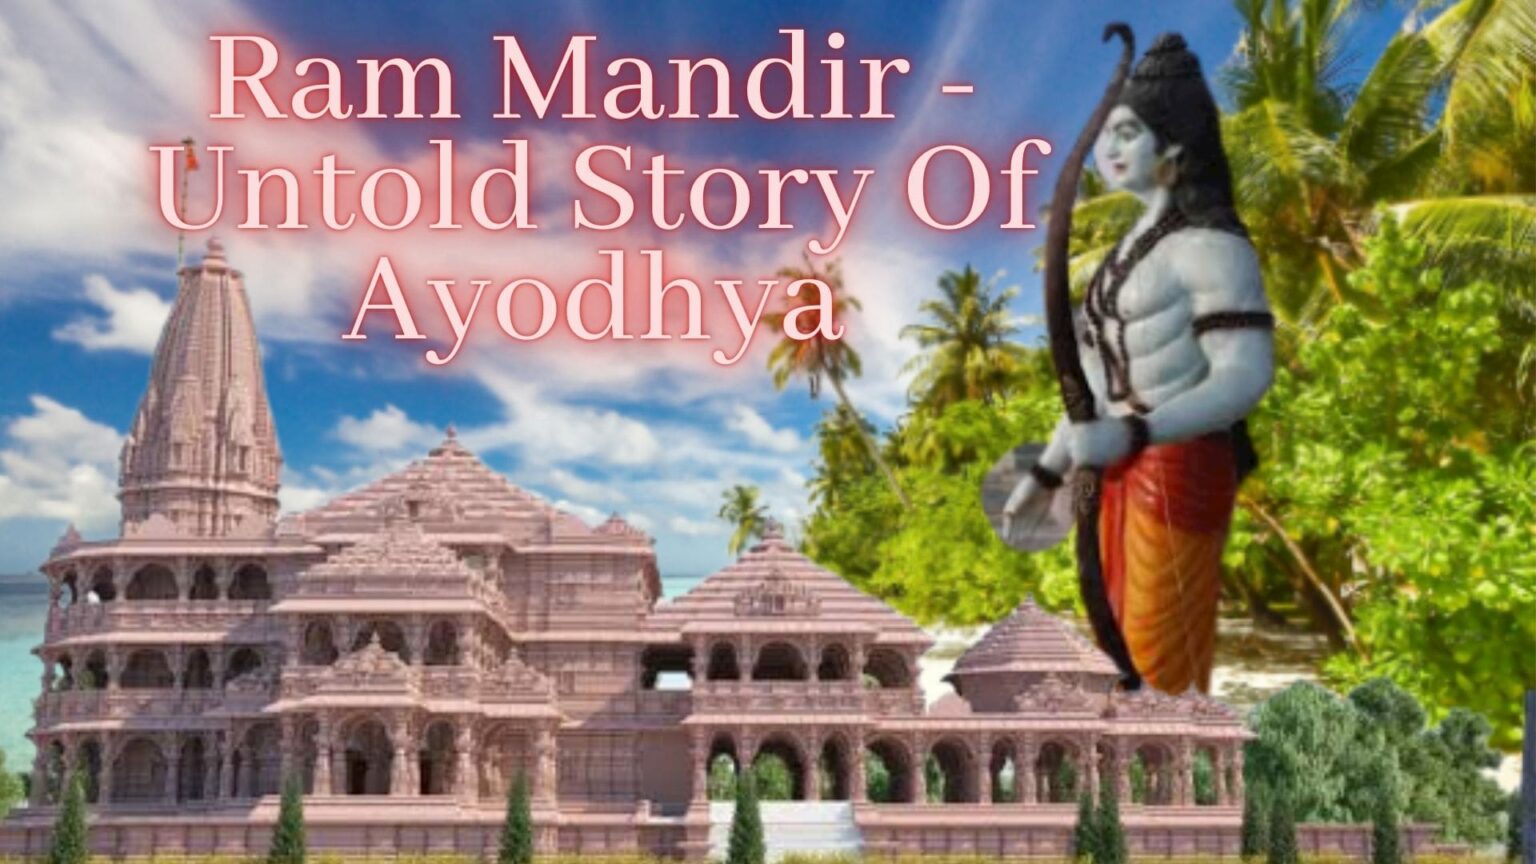 Ram Mandir 22 January 2024 The Untold Story Of Ayodhya Land Dispute Exile Ends After 500 Years 5829